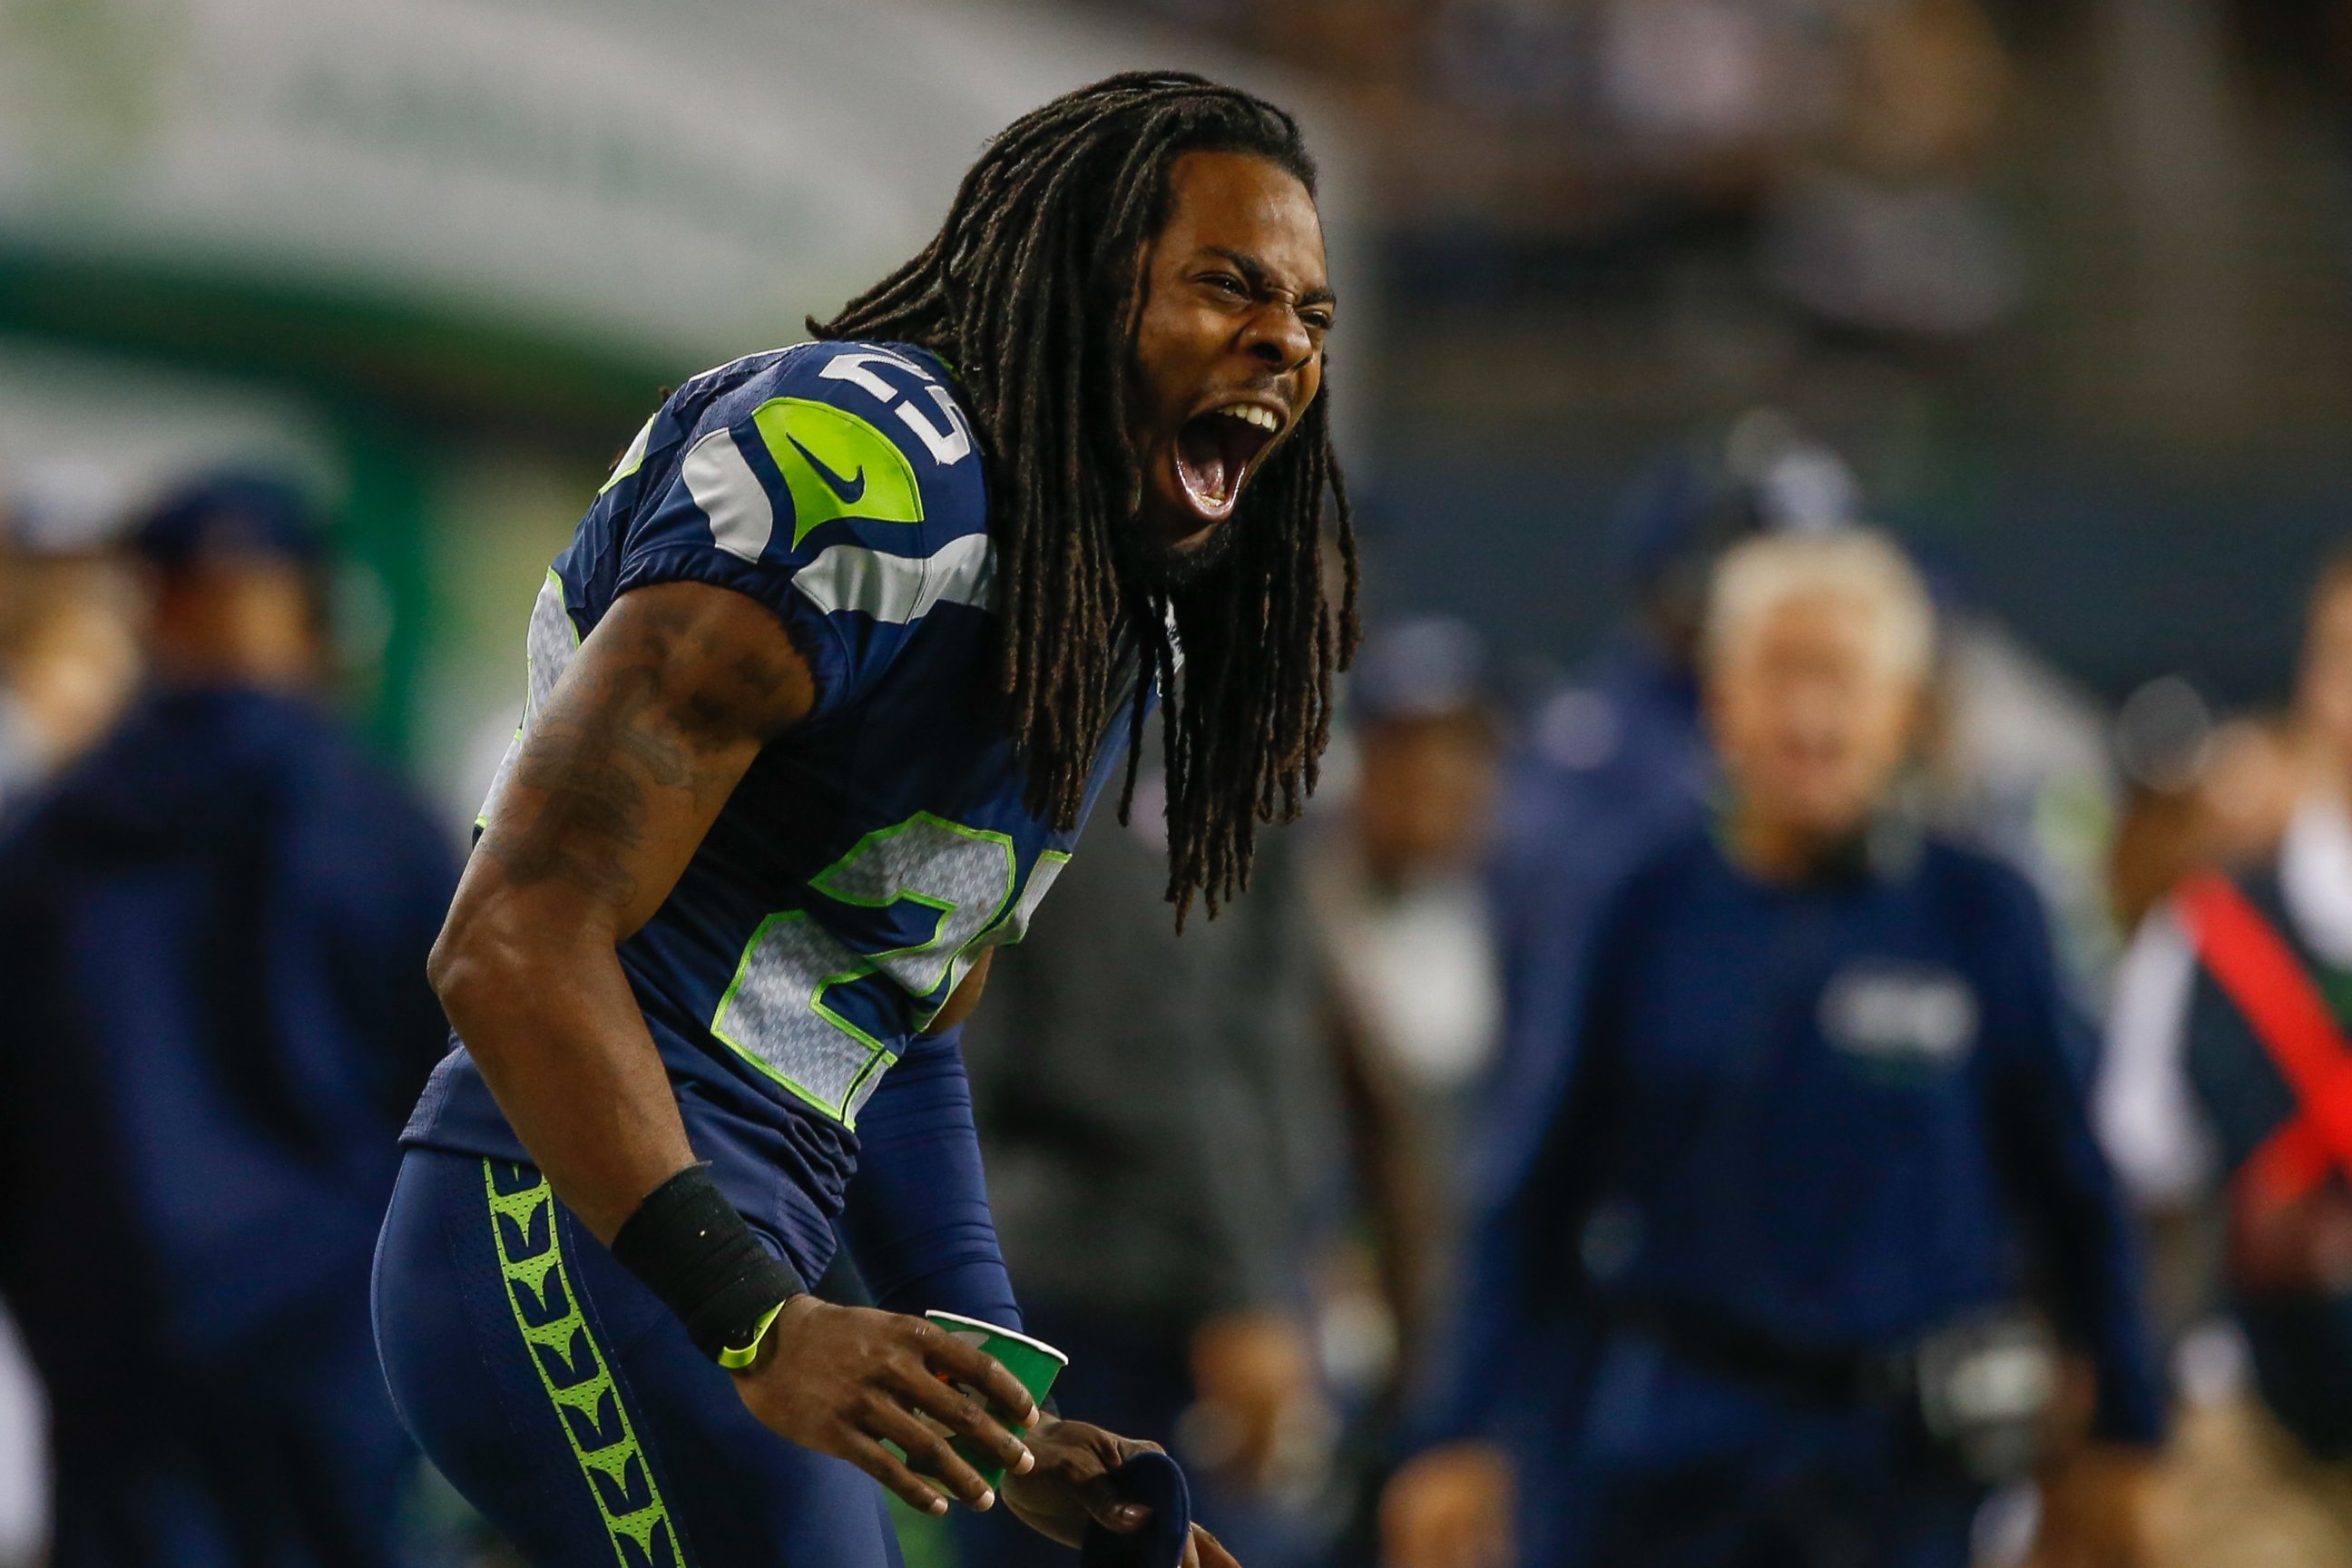 PHOTO: Seattle Seahawks cornerback, Richard Sherman, reacts to a play  against the San Diego Chargers at CenturyLink Field on Aug. 15, 2014 in Seattle, Washington.